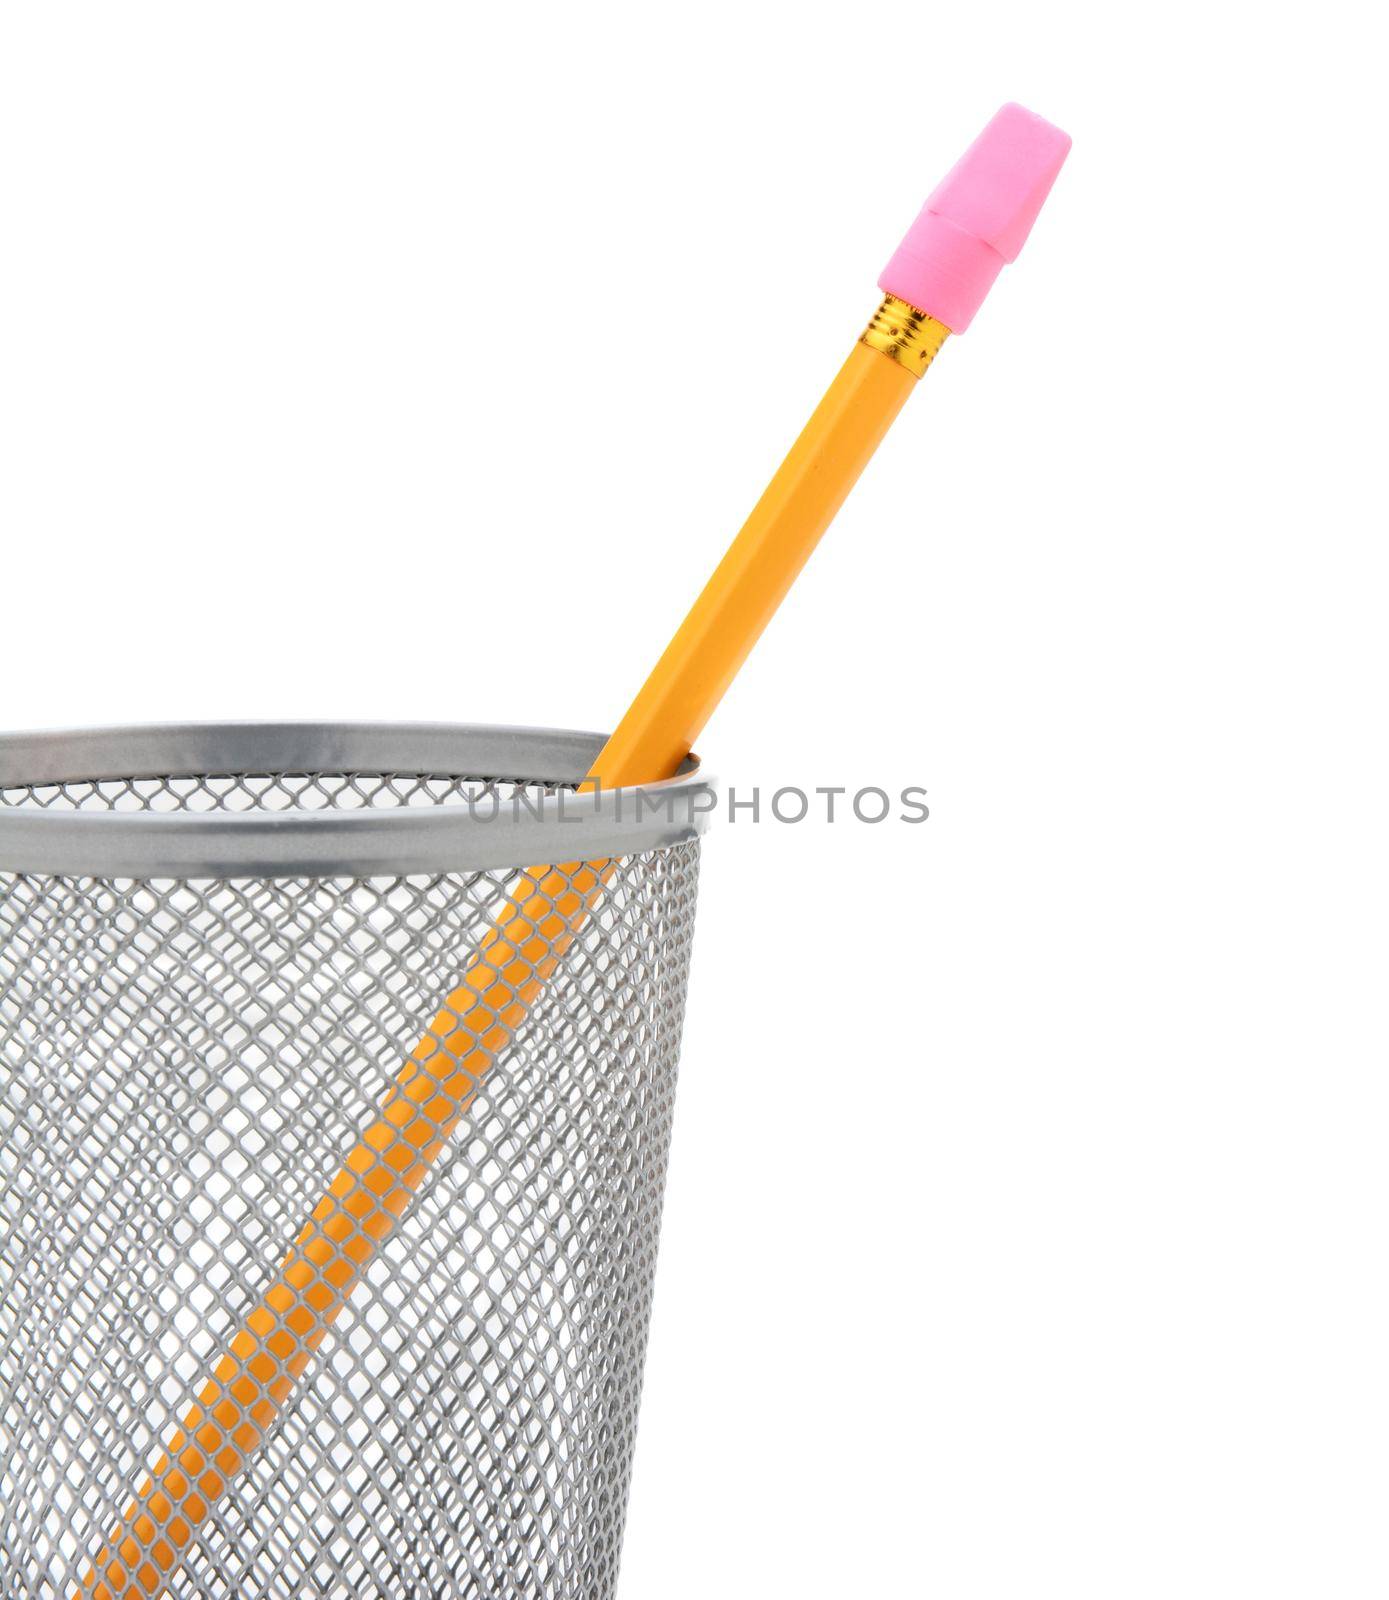 Closeup of a single pencil in a wire pencil cup isolated on white. The yellow pencil has a stick on pink eraser and is at an angle. 